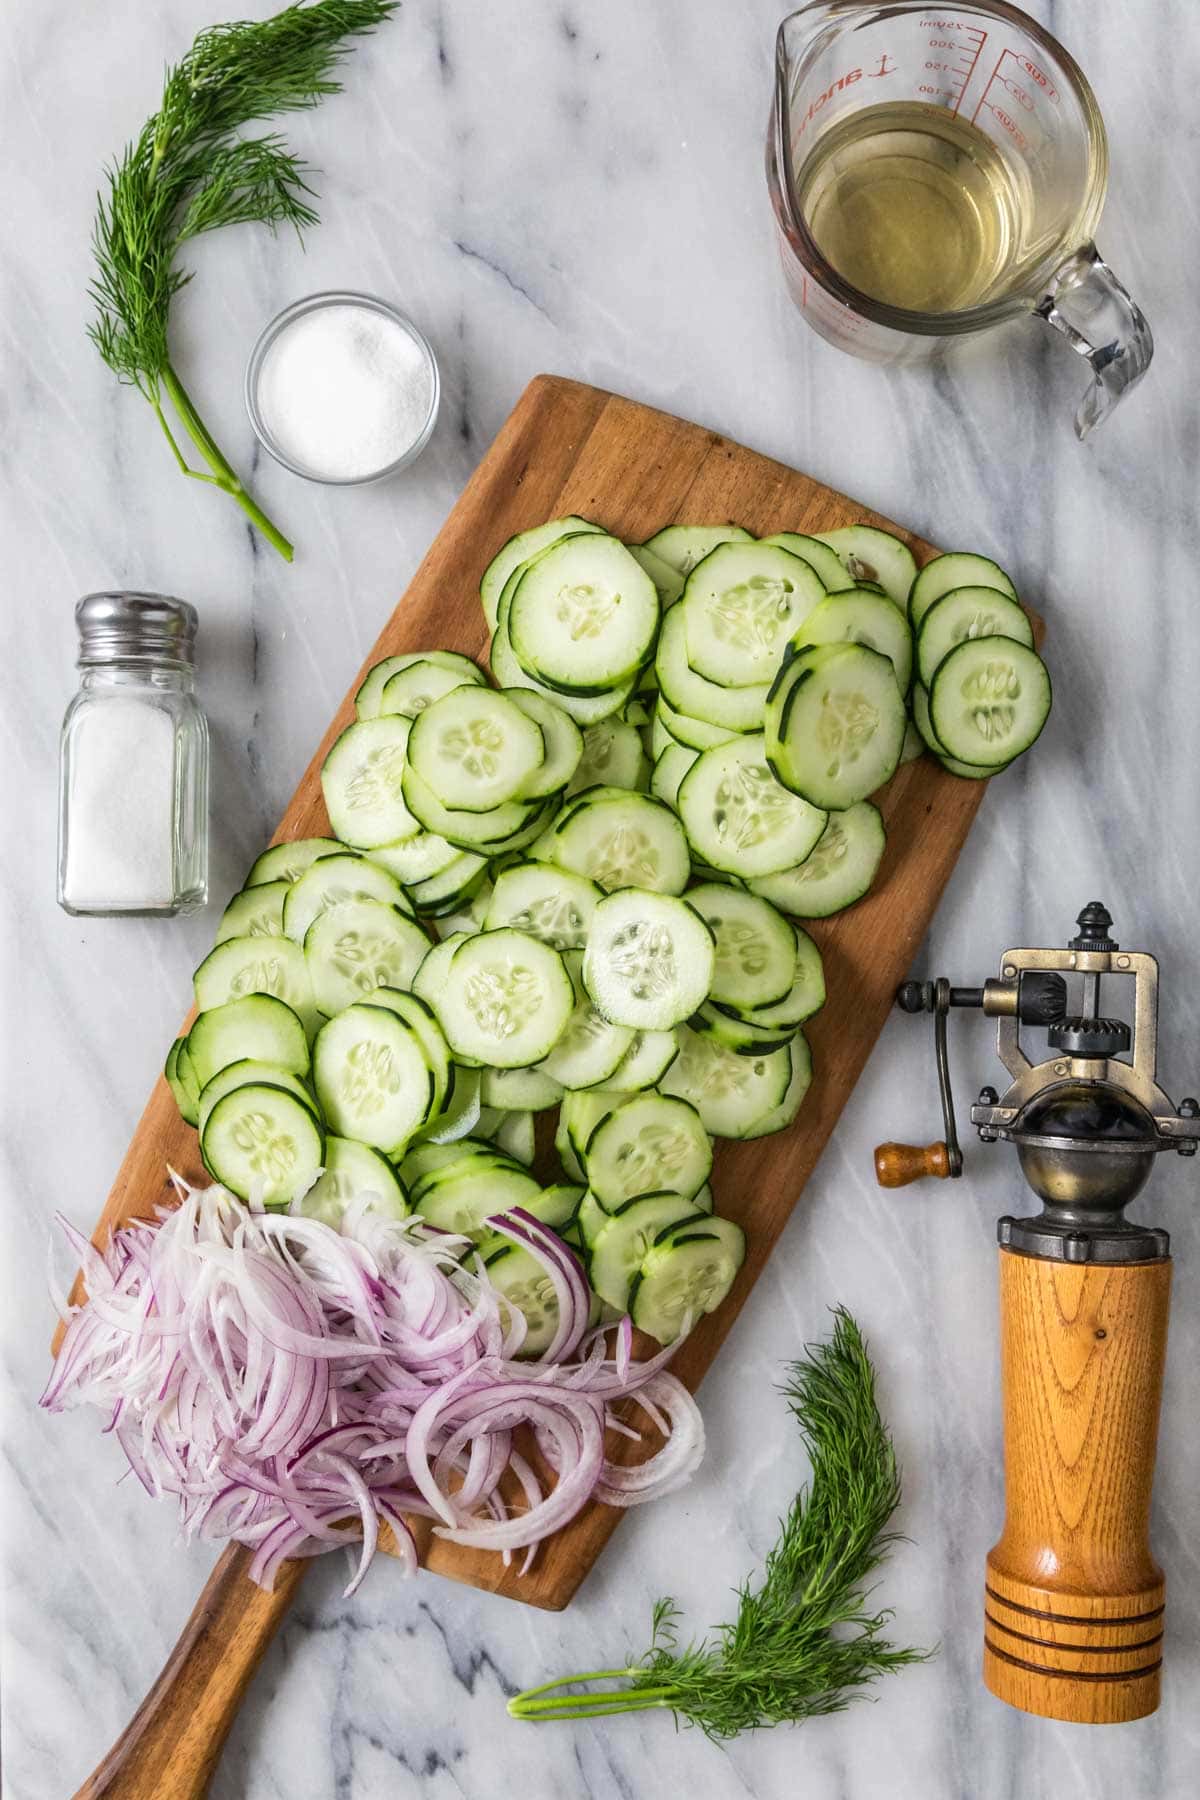 Overhead view of ingredients including cucumber, onion, sugar, dill, and vinegar.